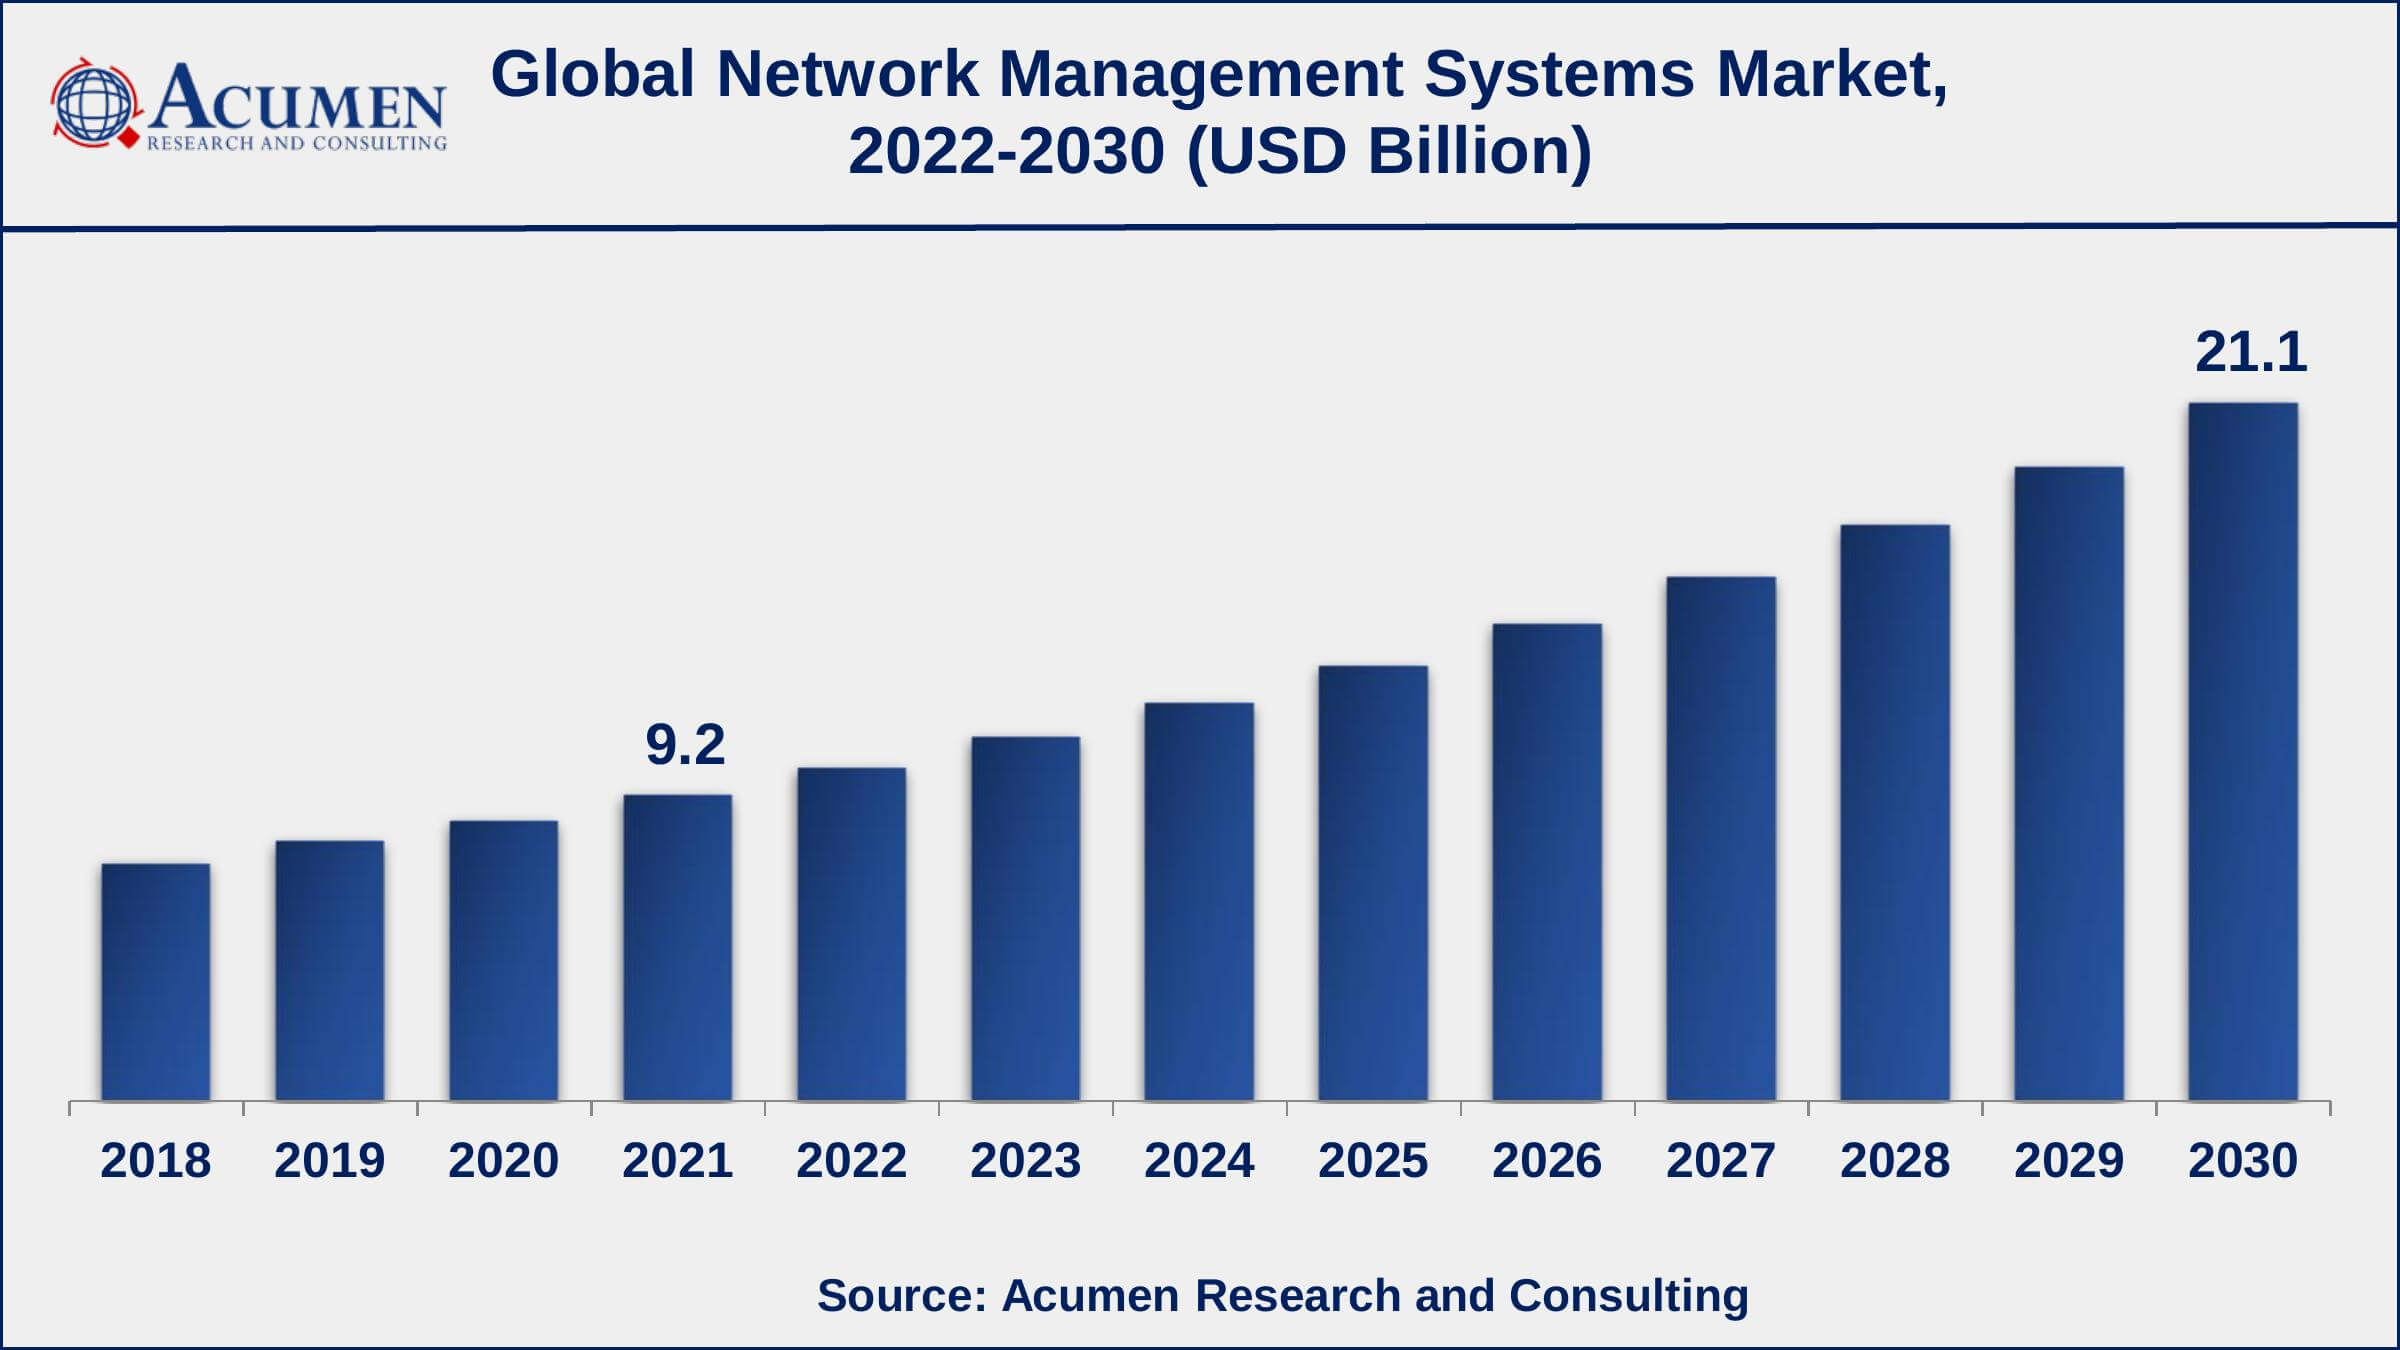 Asia-Pacific network management systems market growth will record a CAGR of more than 10% from 2022 to 2030